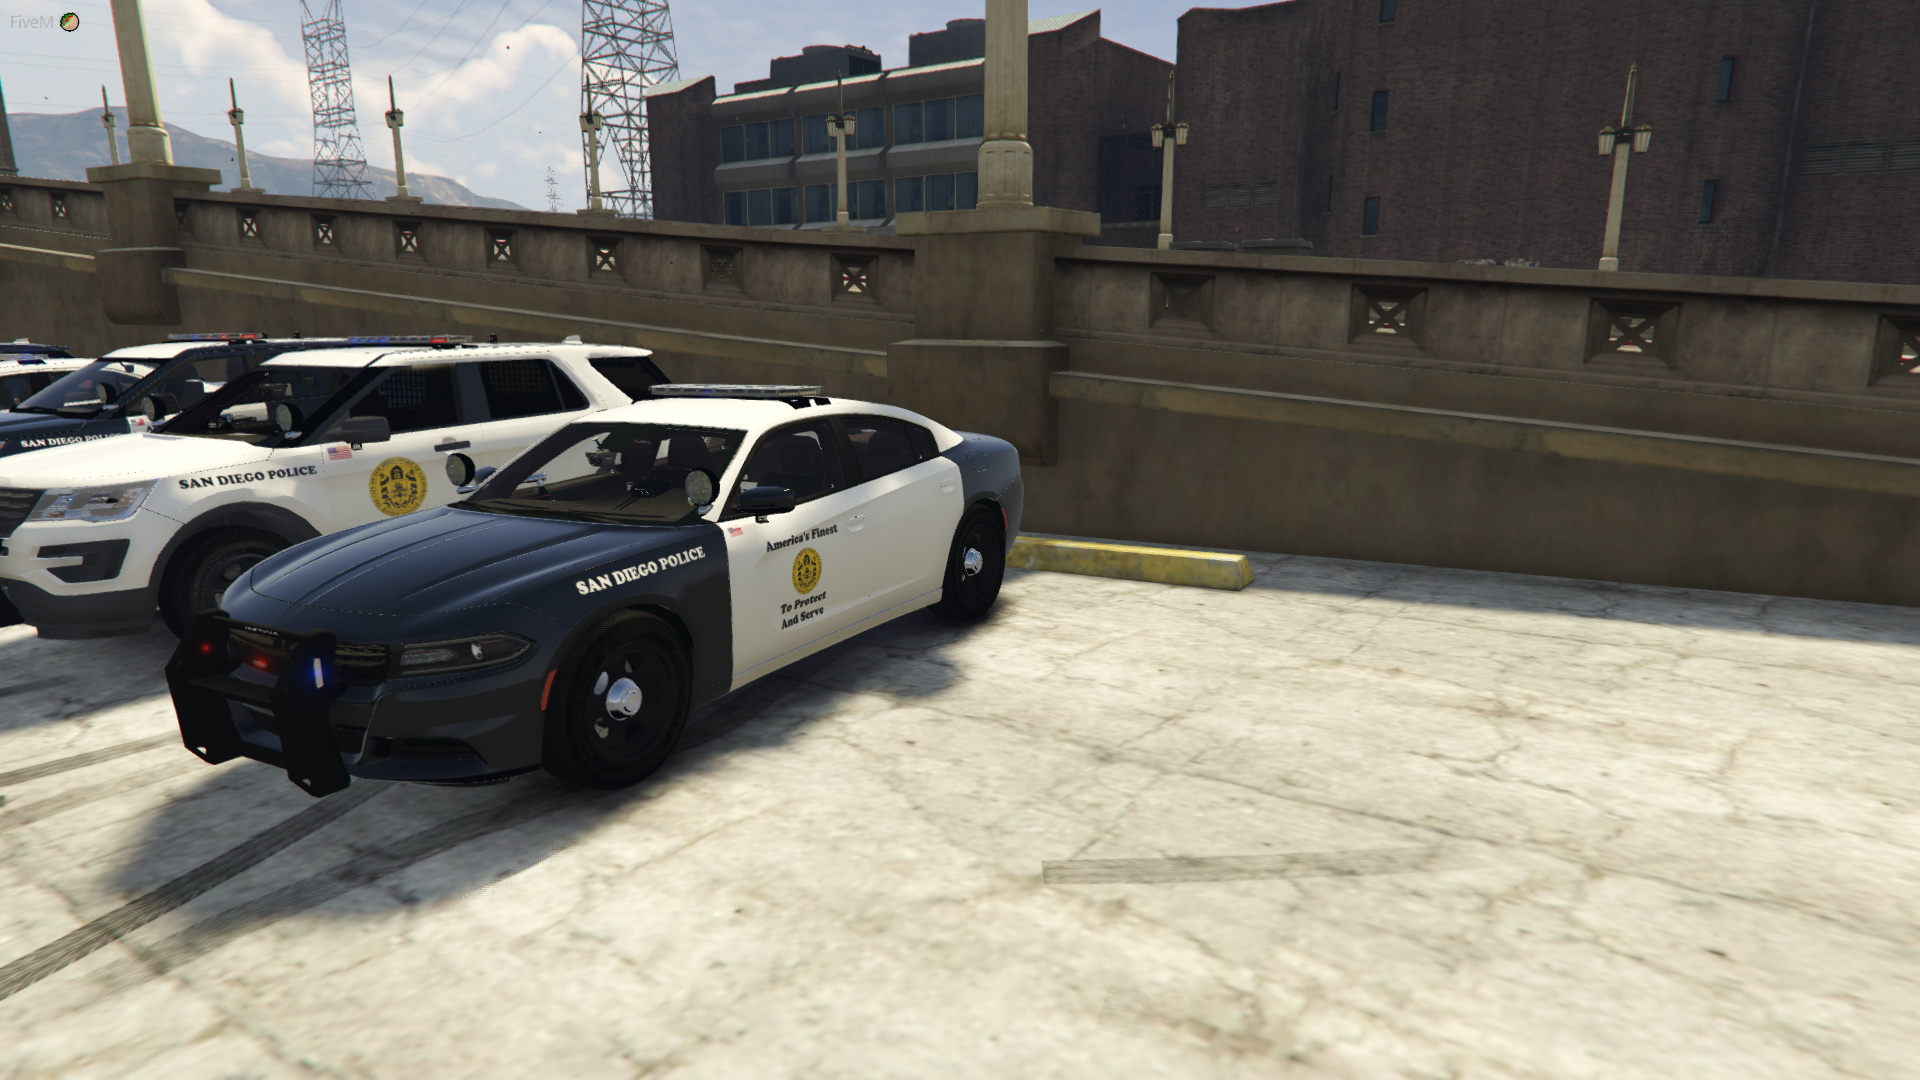 [Release] SAN DIEGO POLICE DEPARTMENT LIVERY PACK - #7 by ...